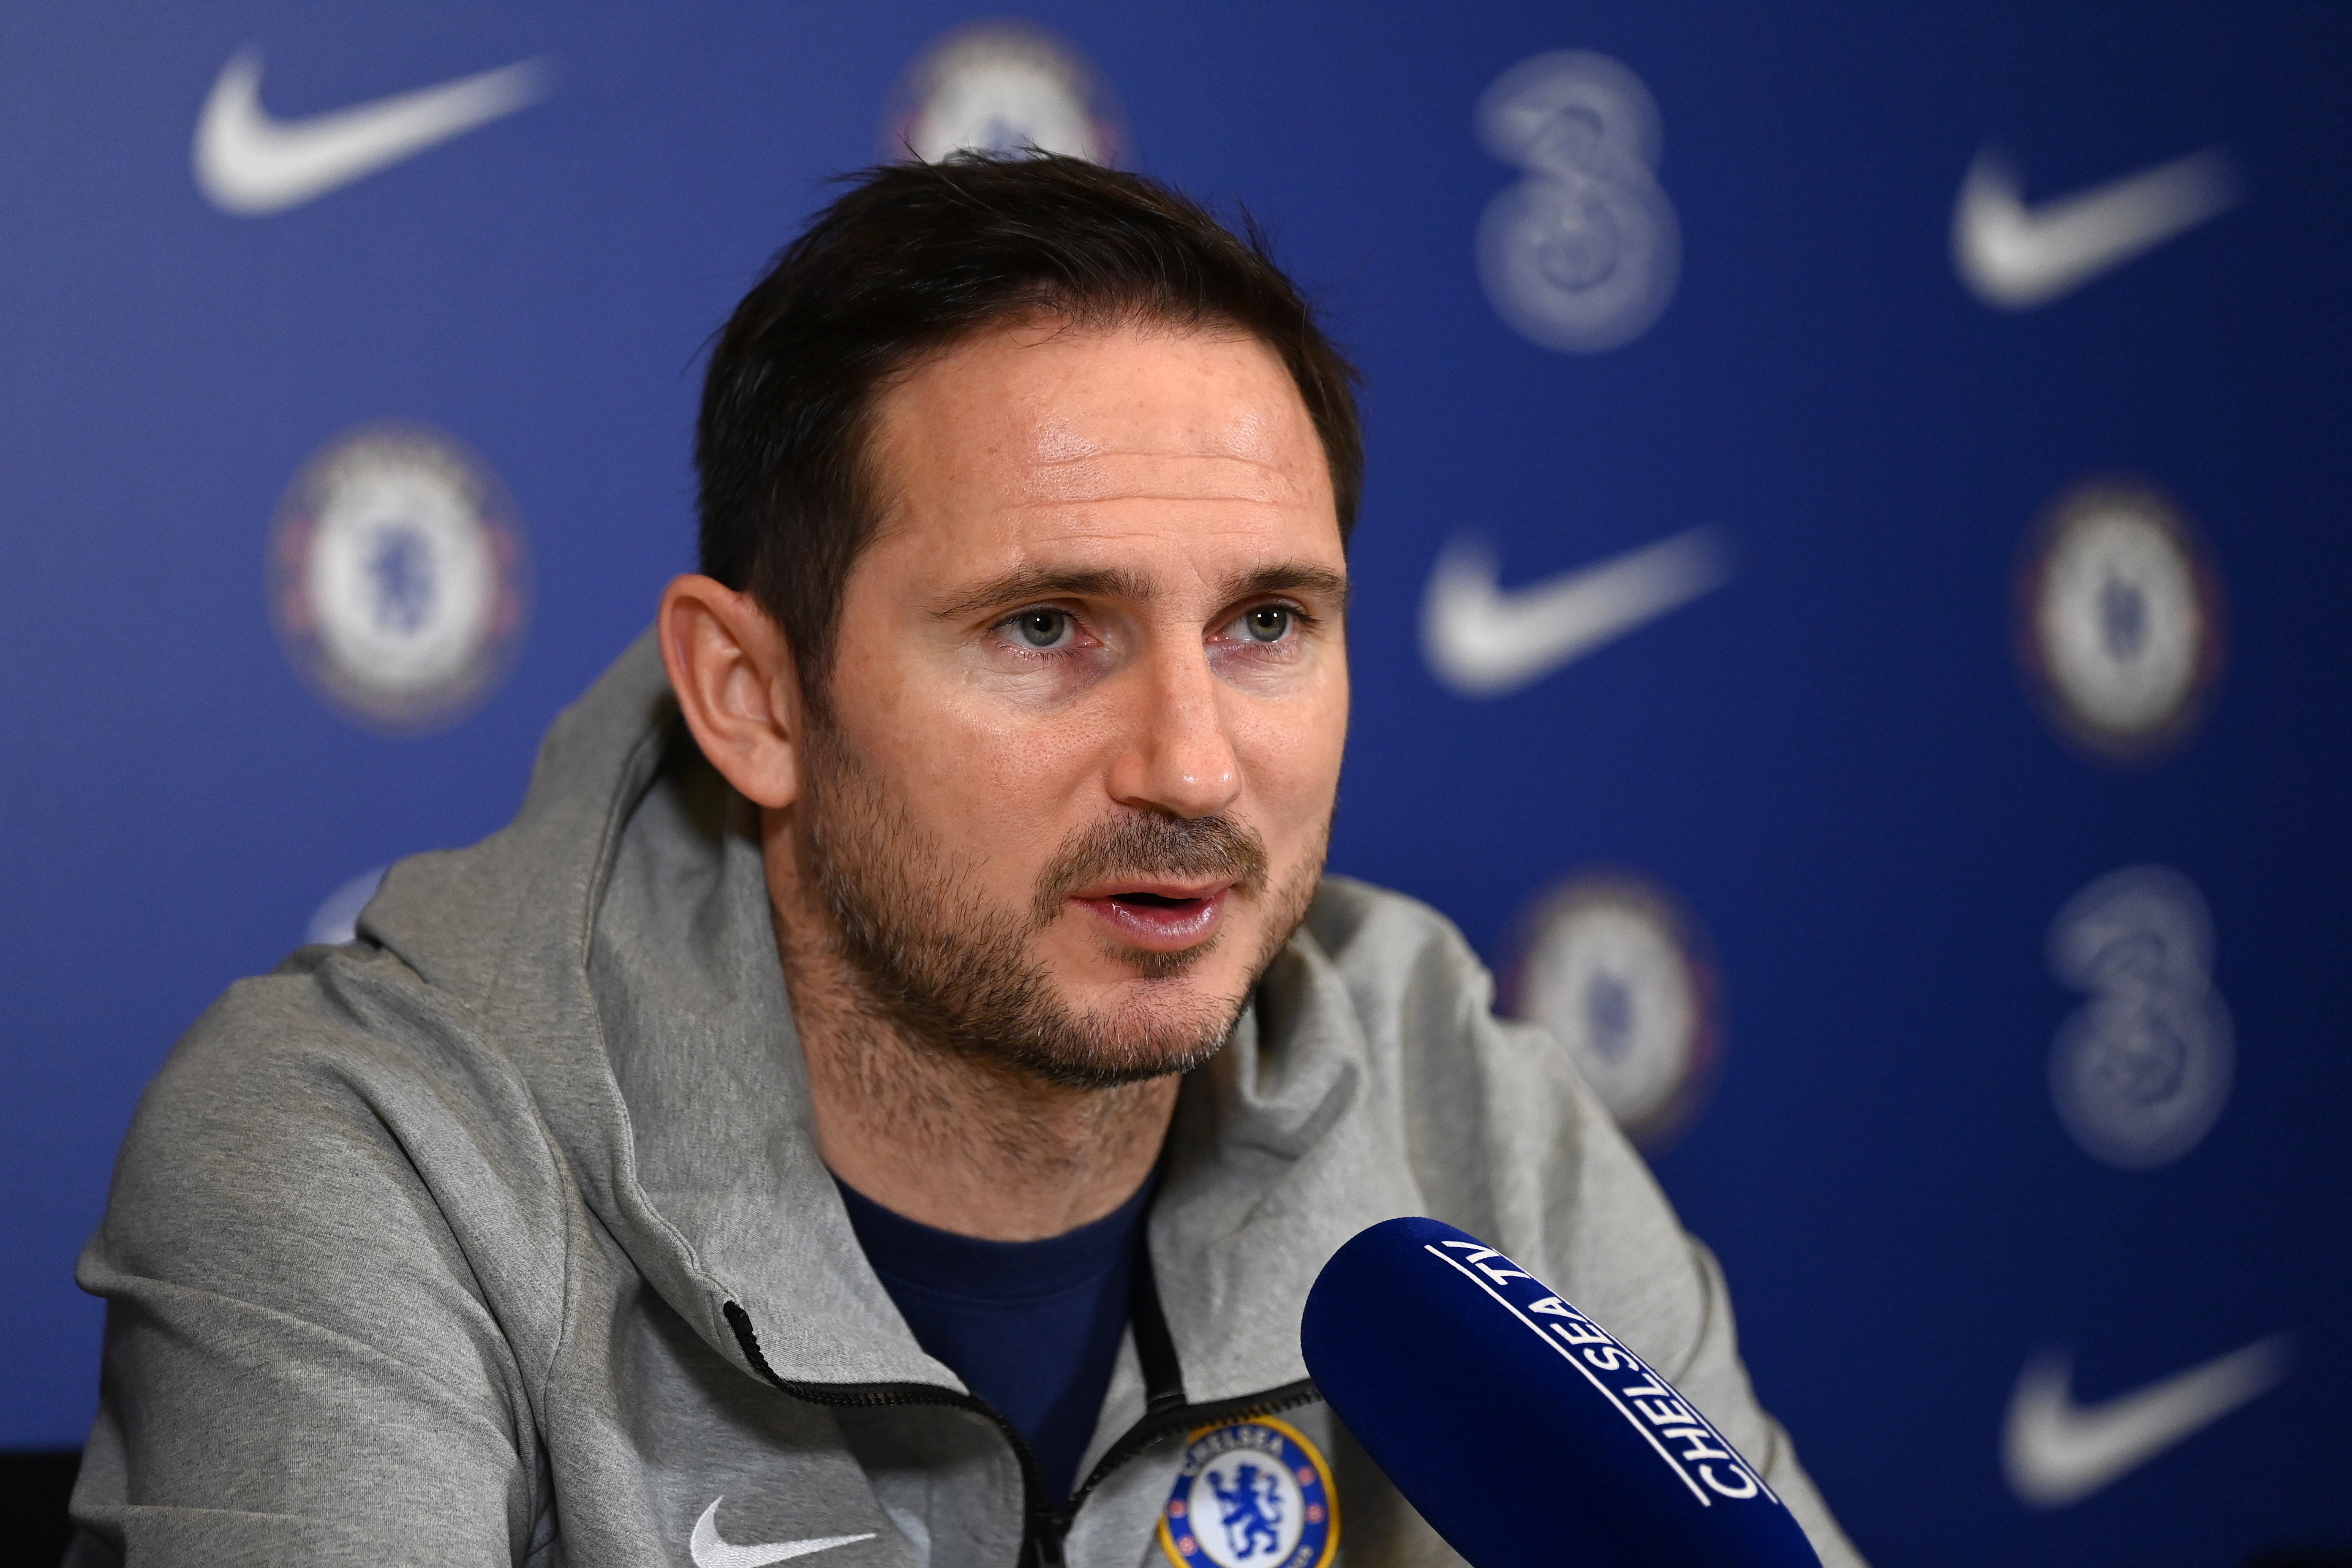 Frank Lampard believes this season’s Premier League champions will have a much lower points tally than normal